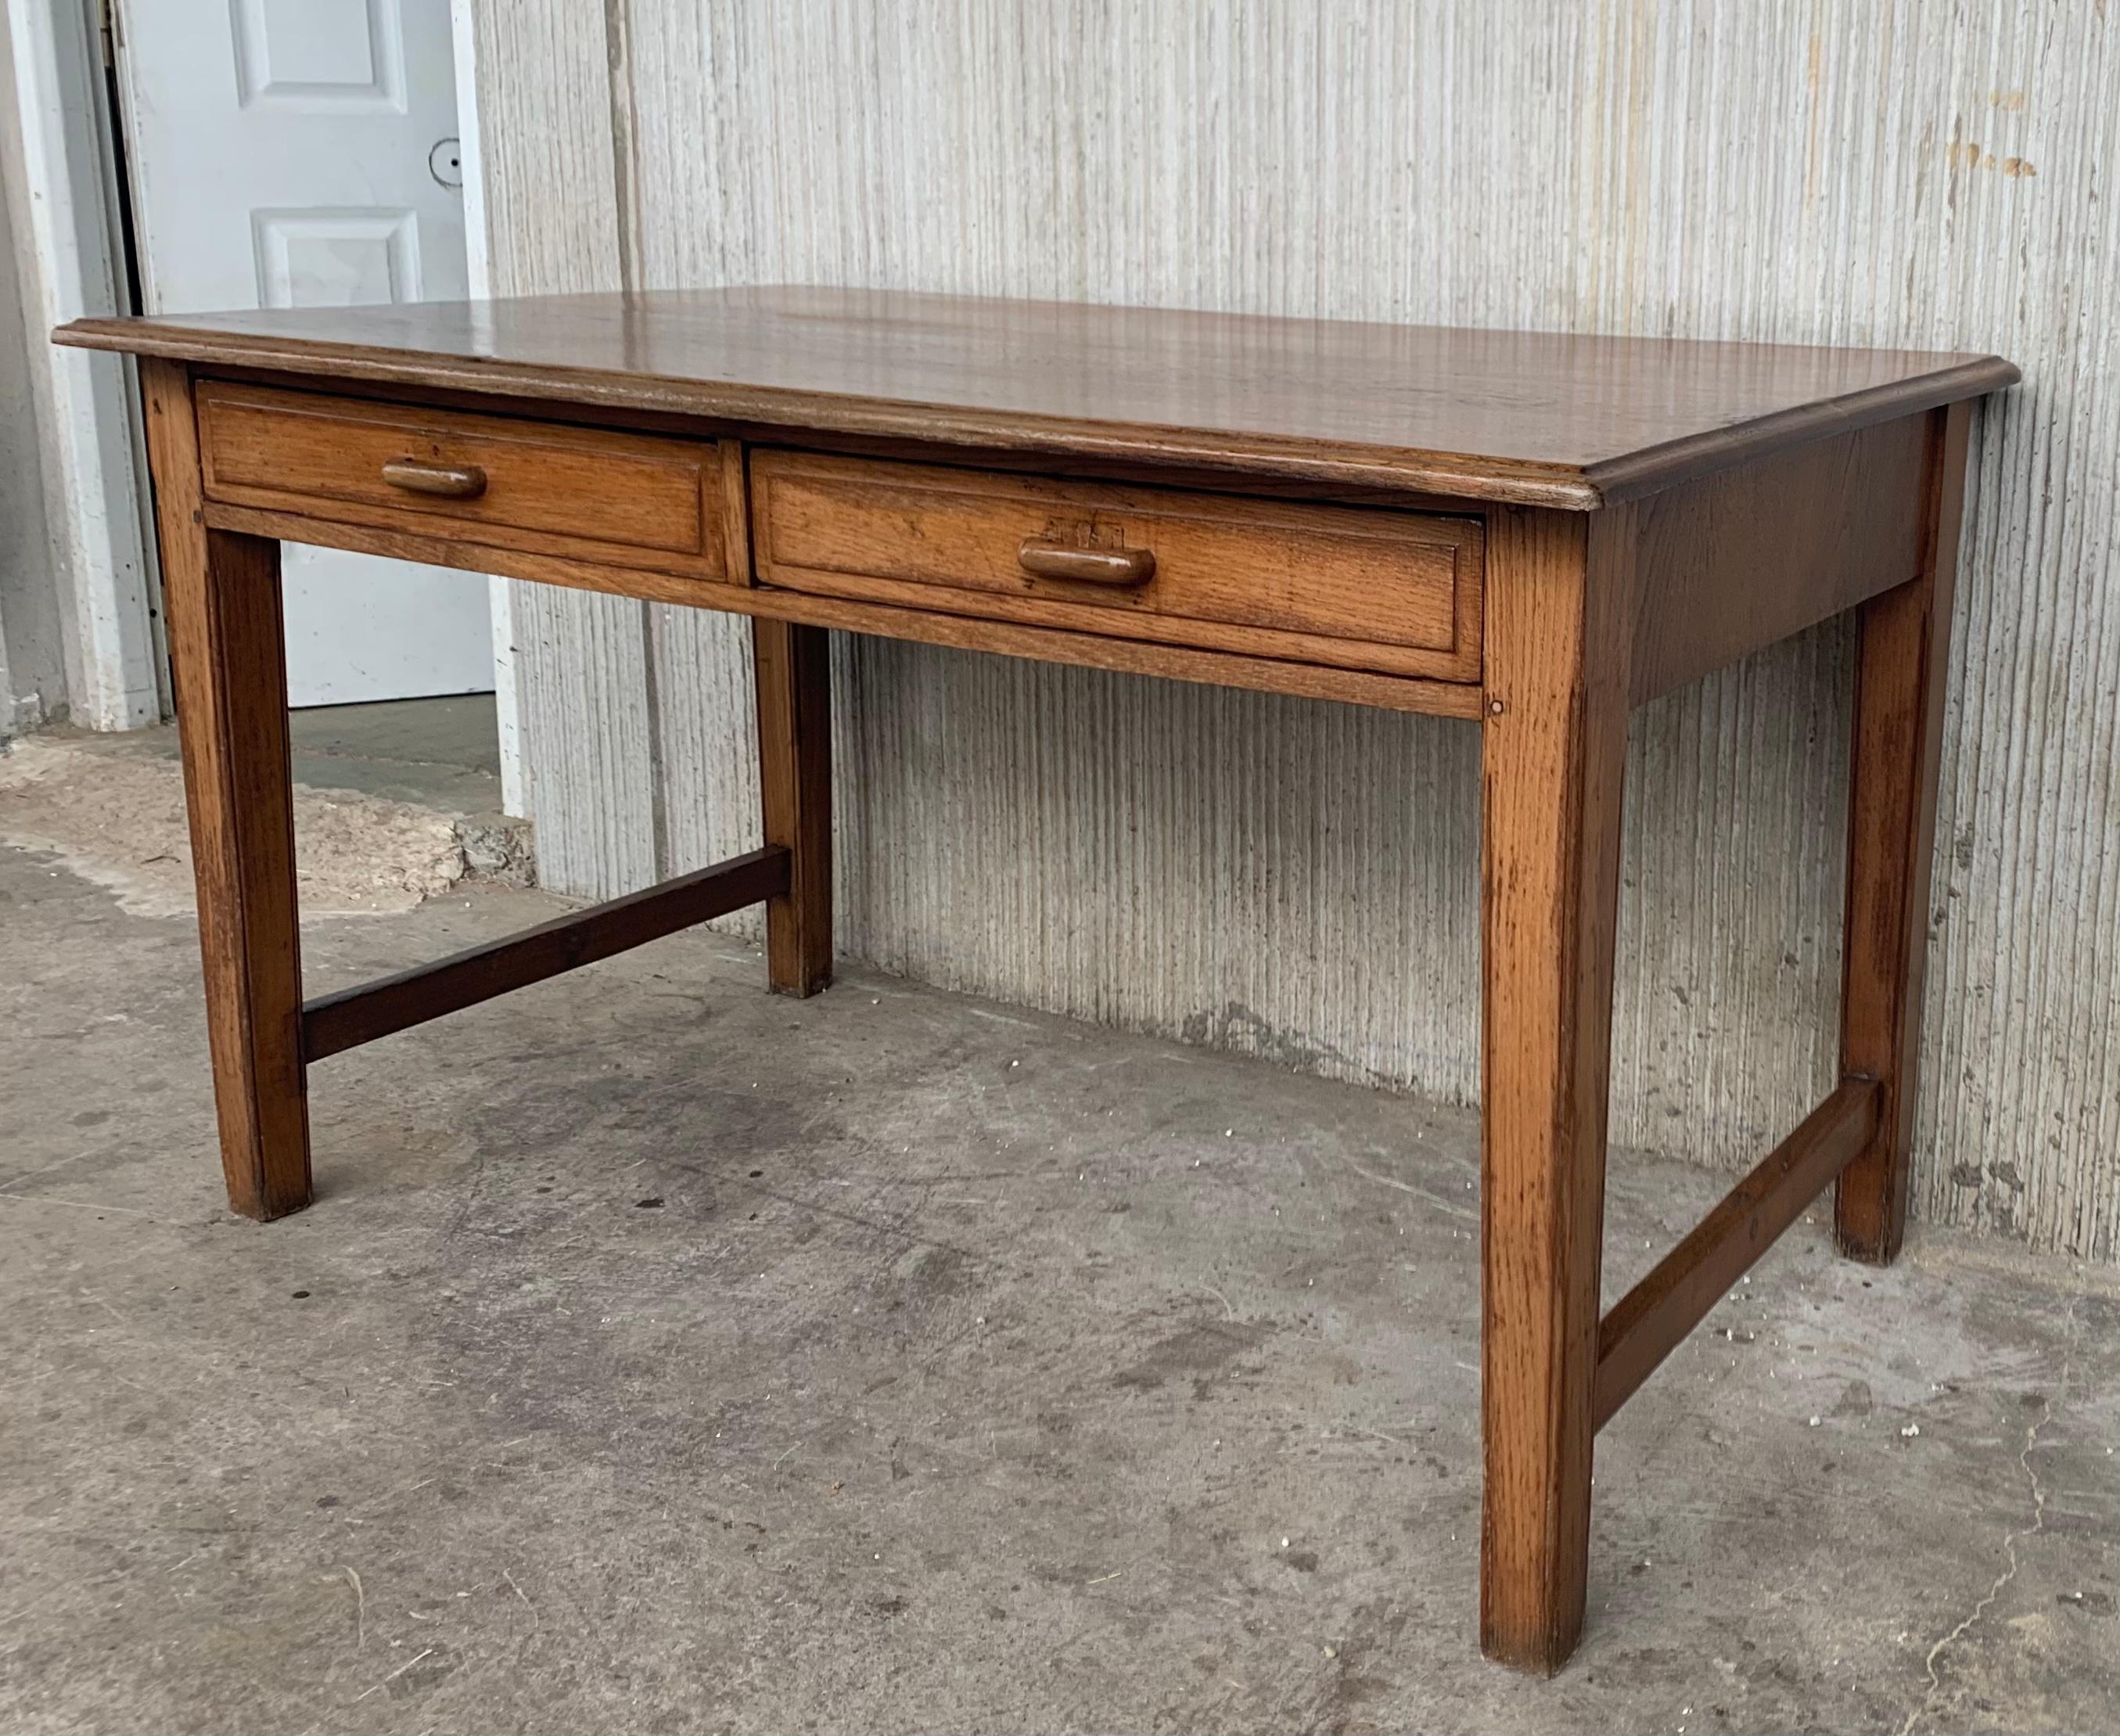 A charming early 20th century Spanish pine farm table with two trestles and a wonderfully well-worn finish from a century of use. Table works well for dining, but can also be used as a desk.

Height from the floor to the drawers. 24.80in.